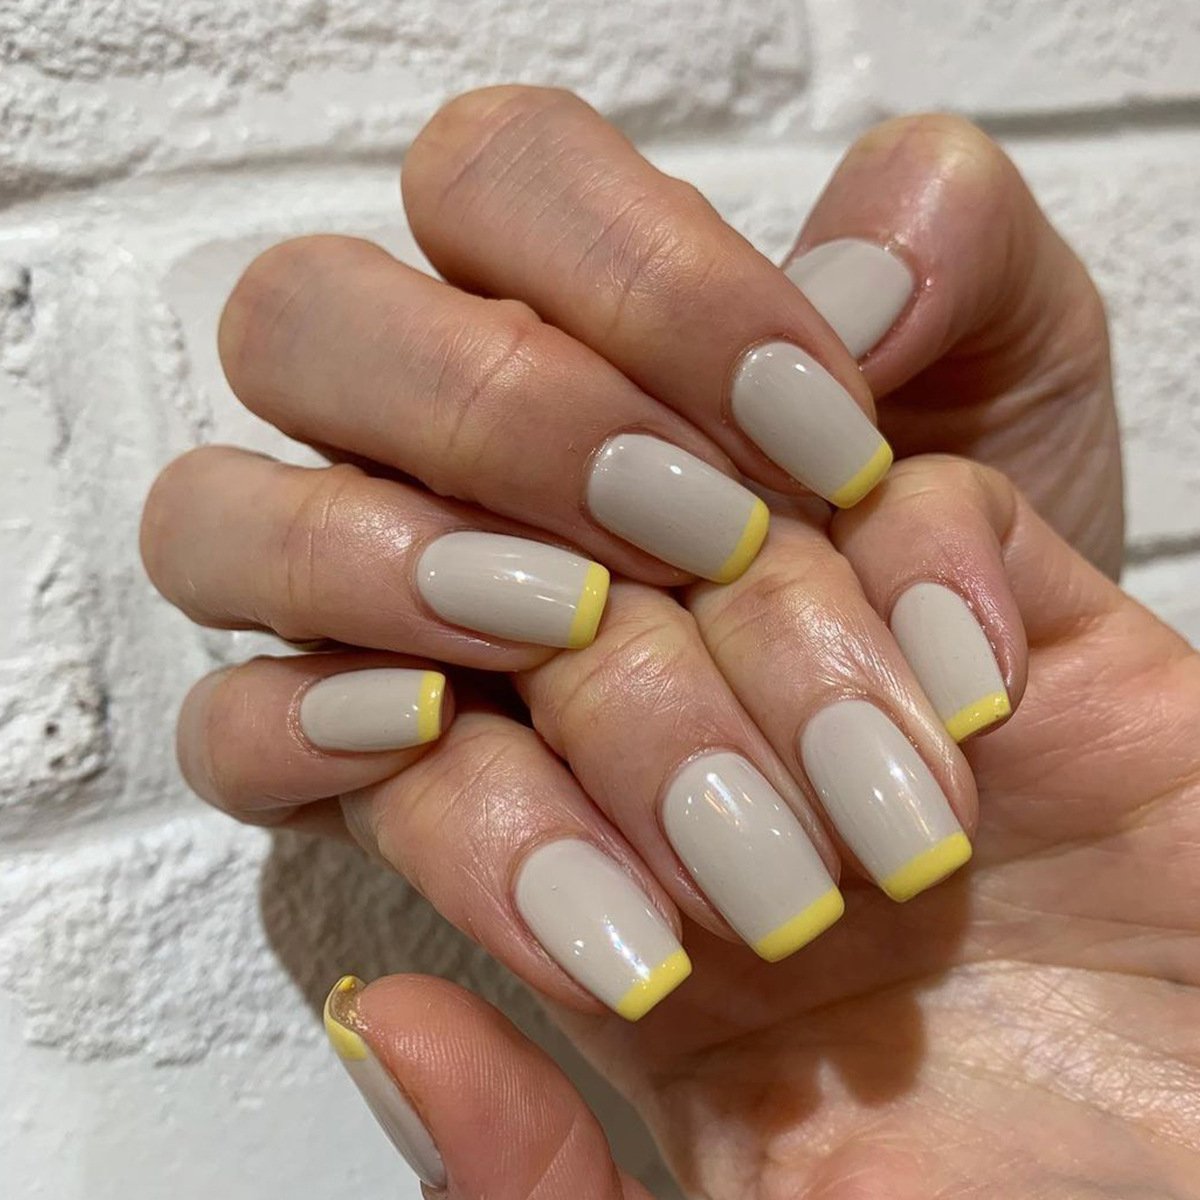 FRENCH TIPS-GRAY YELLOW